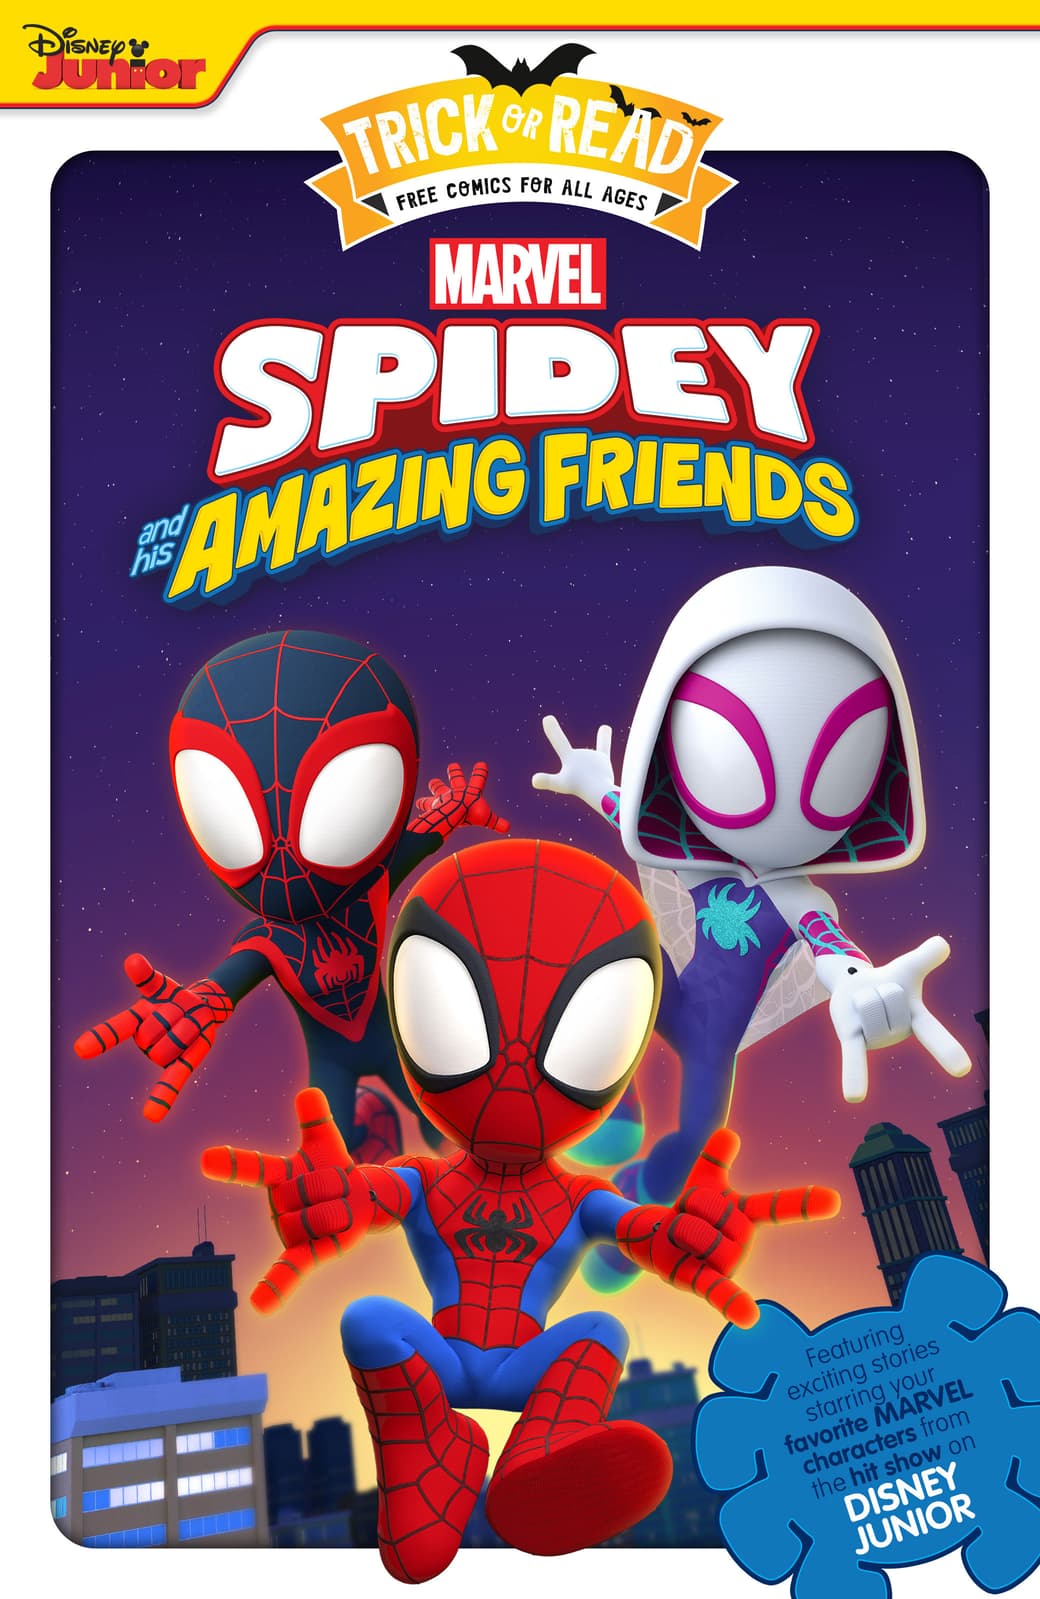 SPIDEY AND HIS AMAZING FRIENDS #1 HALLOWEEN TRICK-OR-READ 2022 Edited by Peter Charpentier